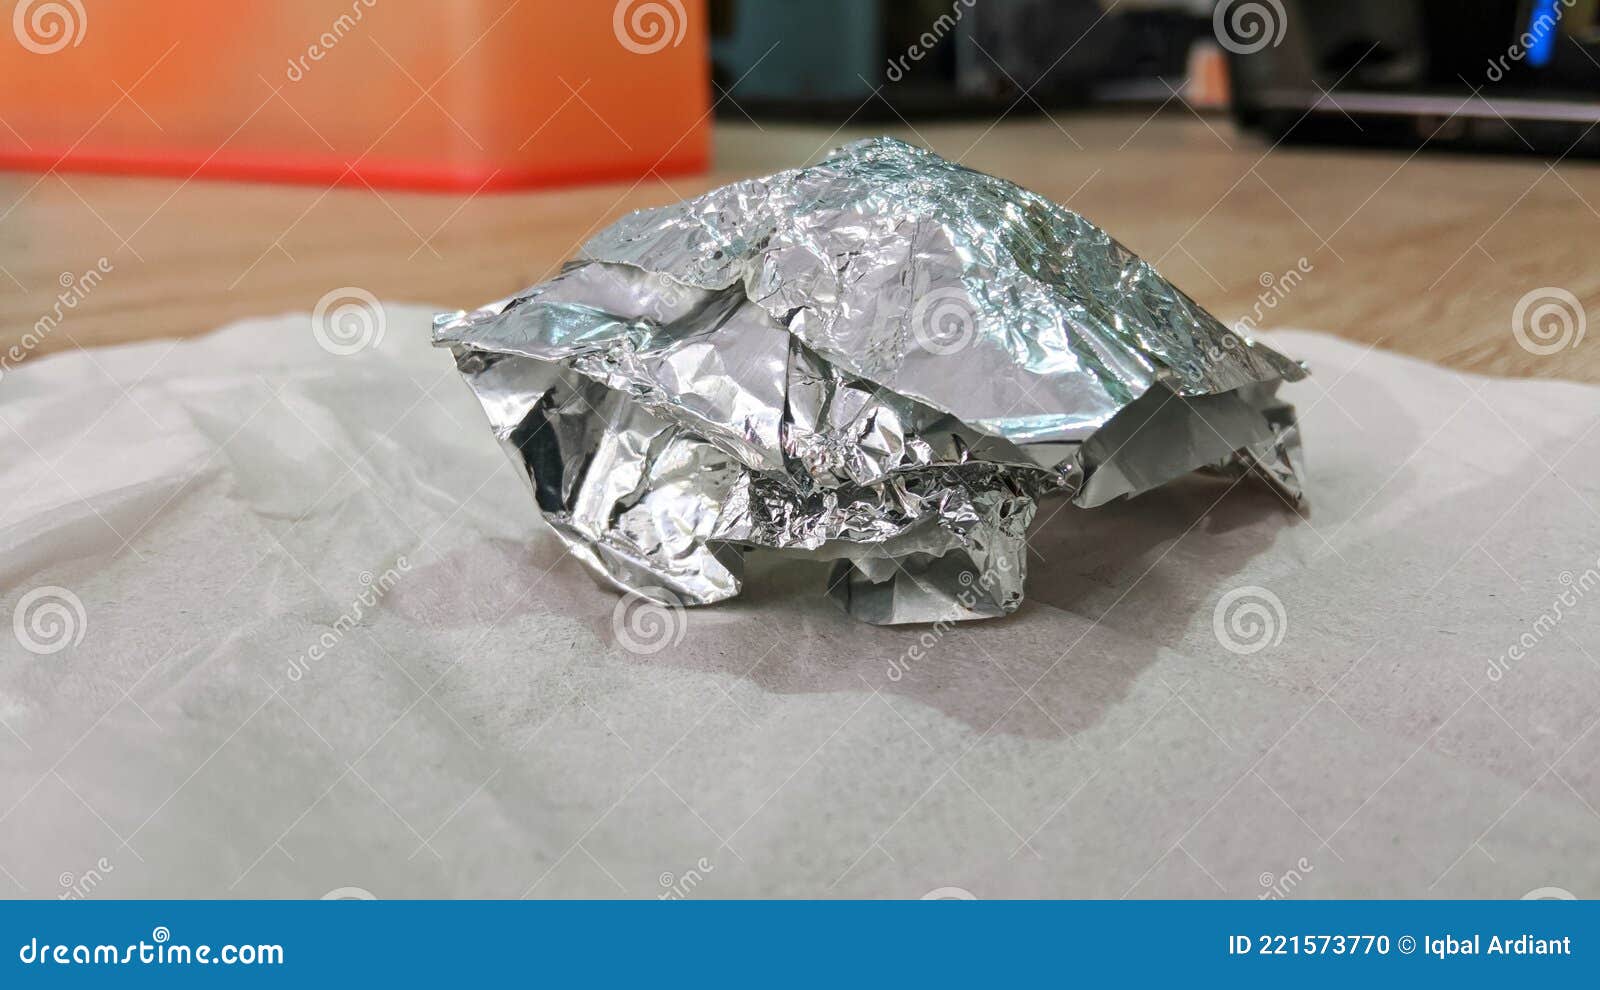 clumps of aluminum foil on the table.